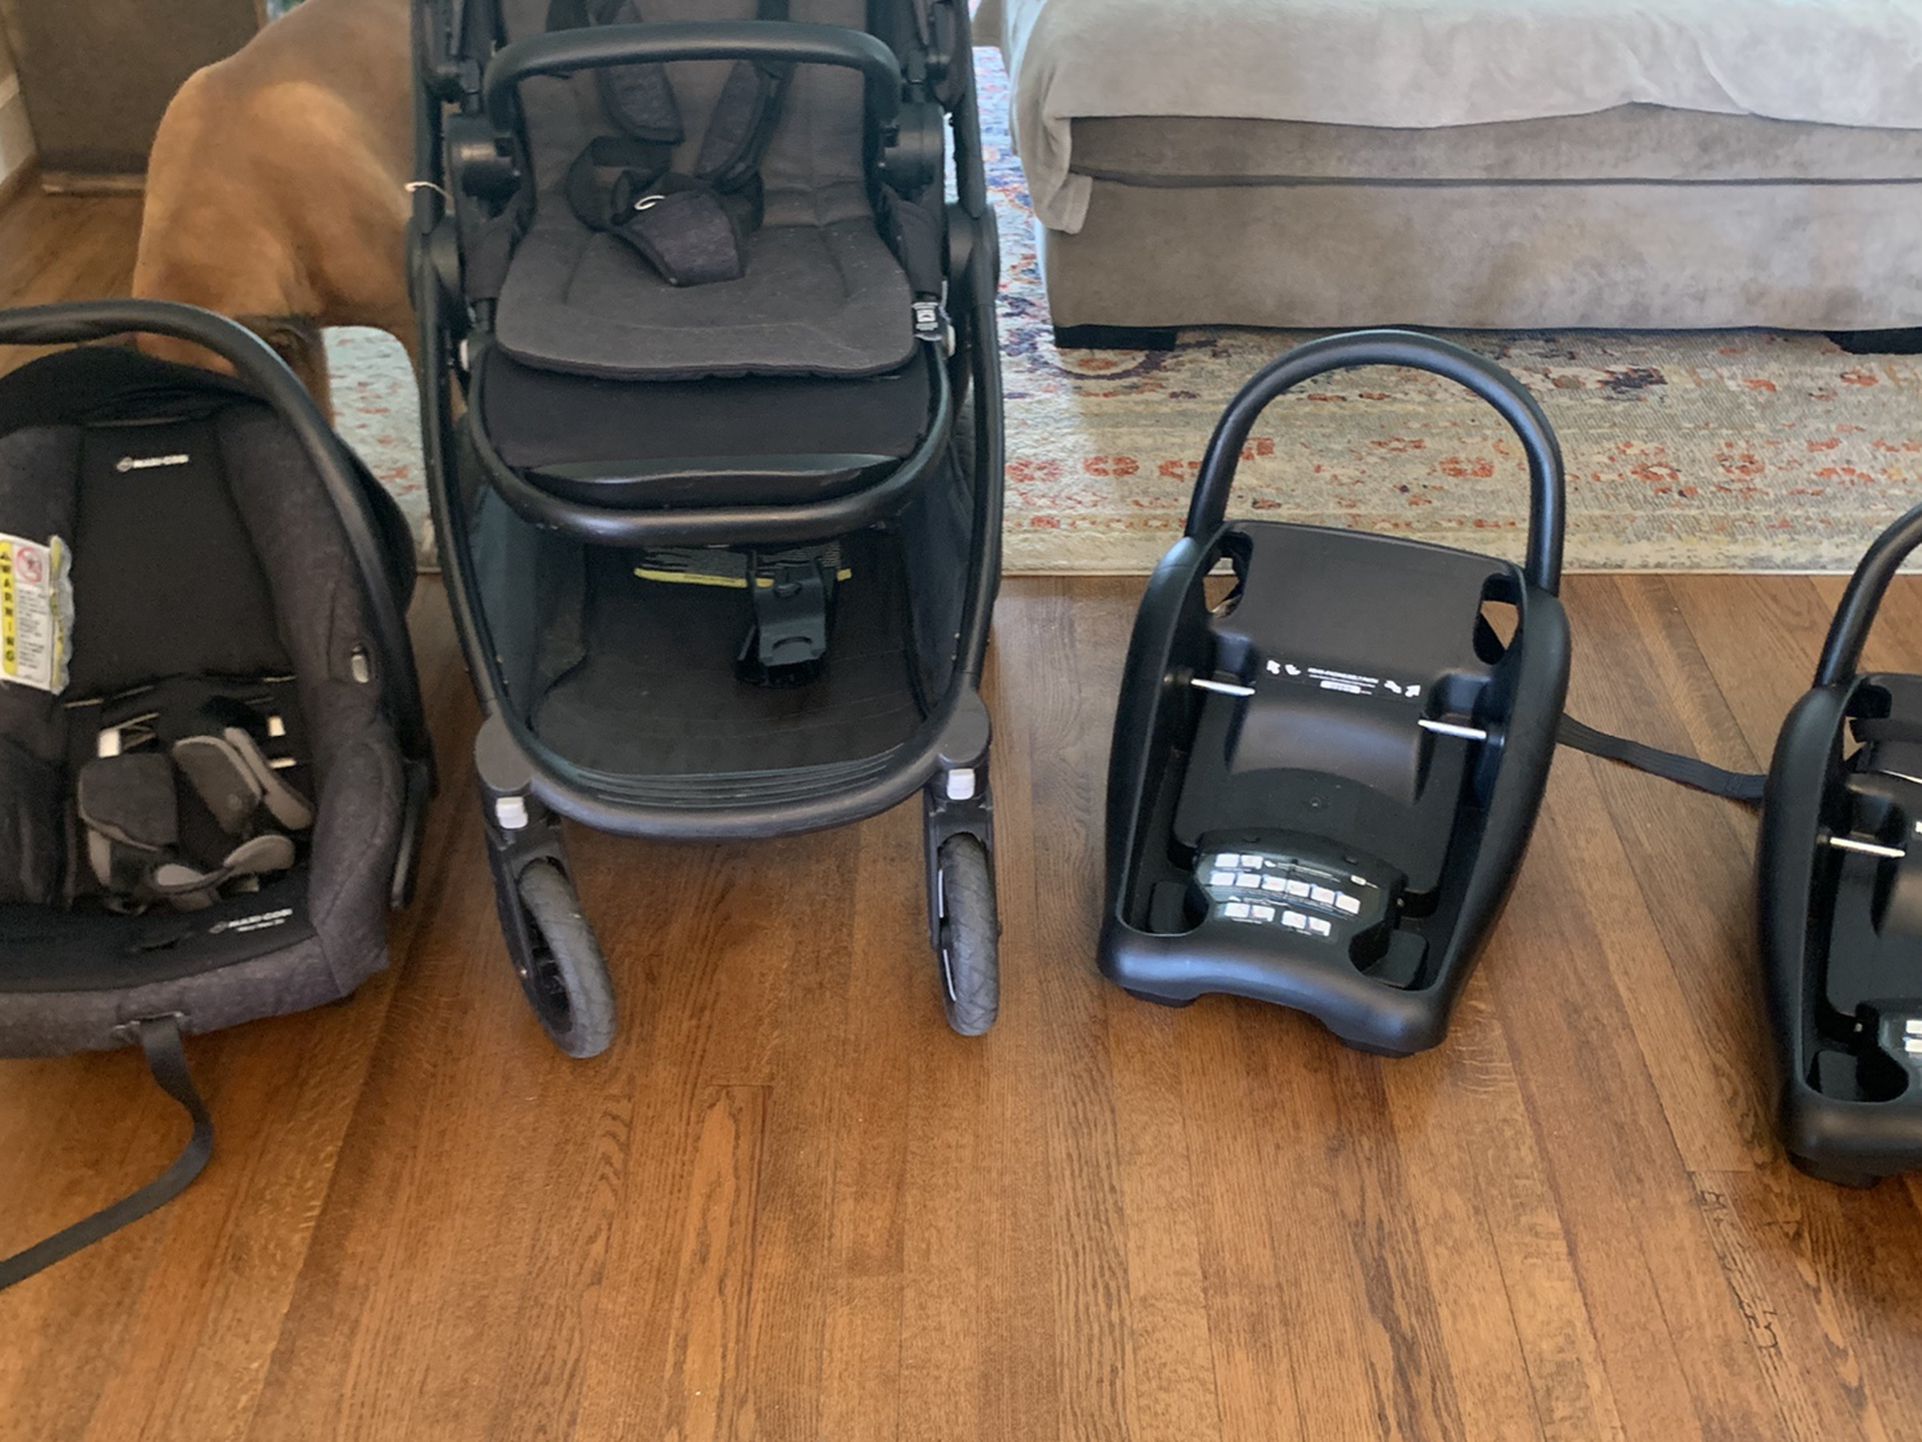 Maxi Cost Stroller, Car seat And Two Car Bases 